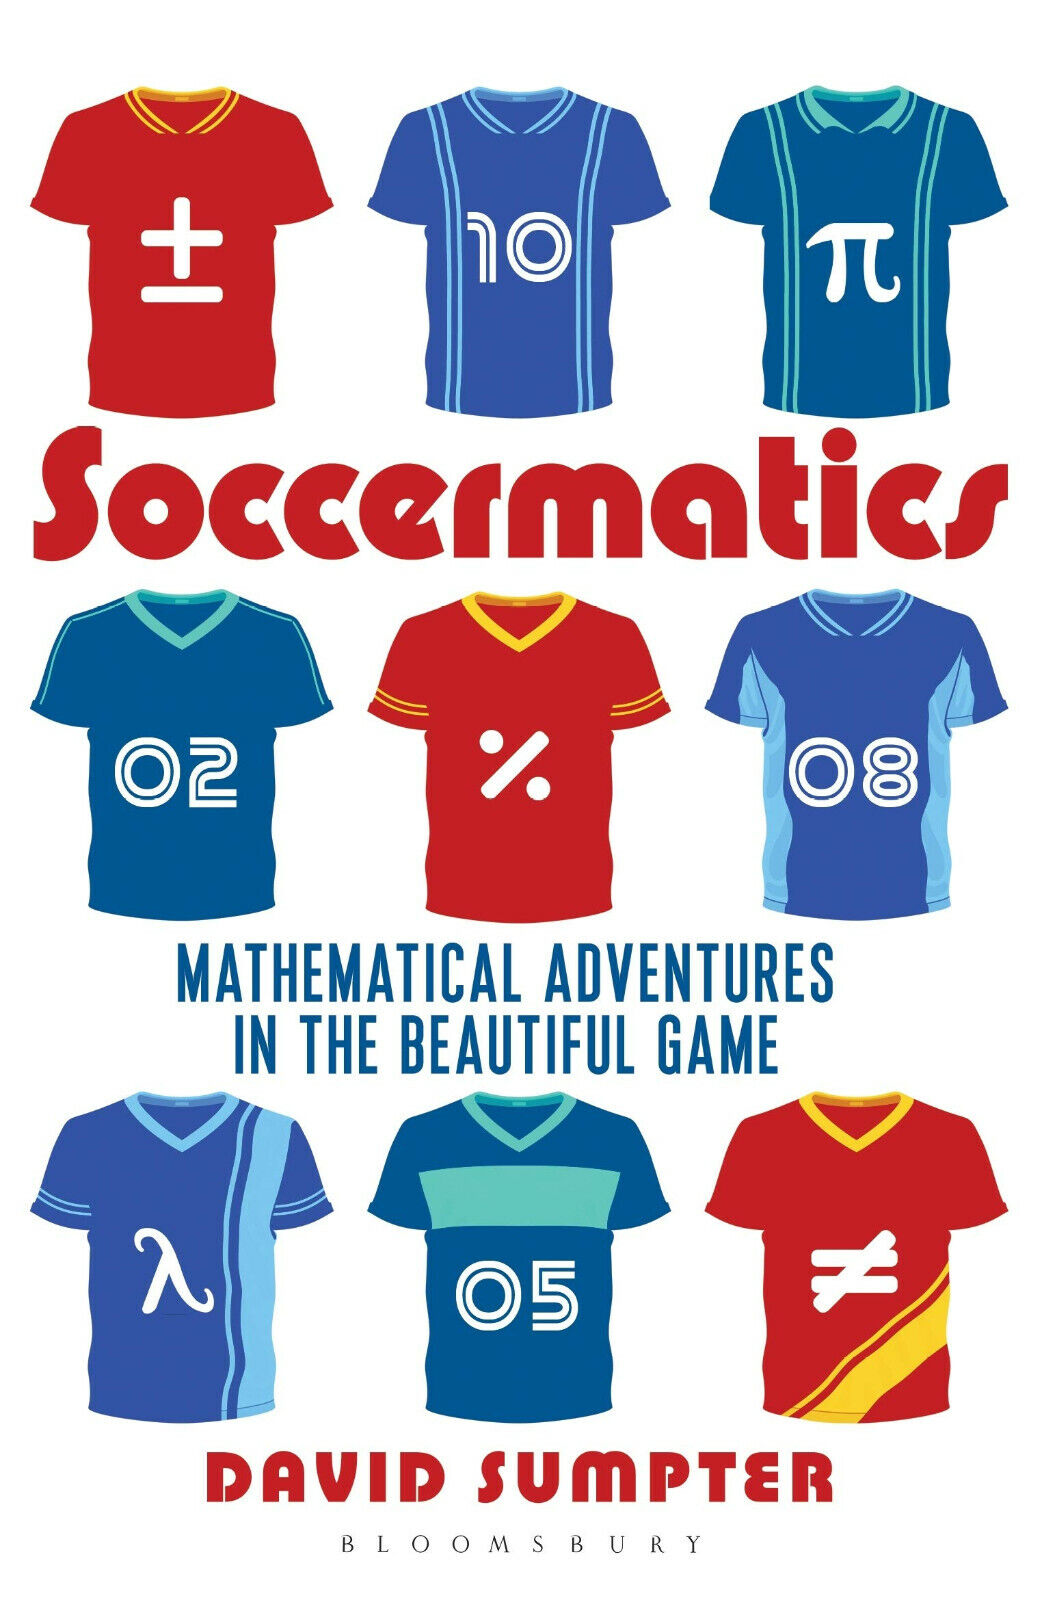 Soccermatics: Mathematical Adventures in the Beautiful Game Pro-Edition - 2017